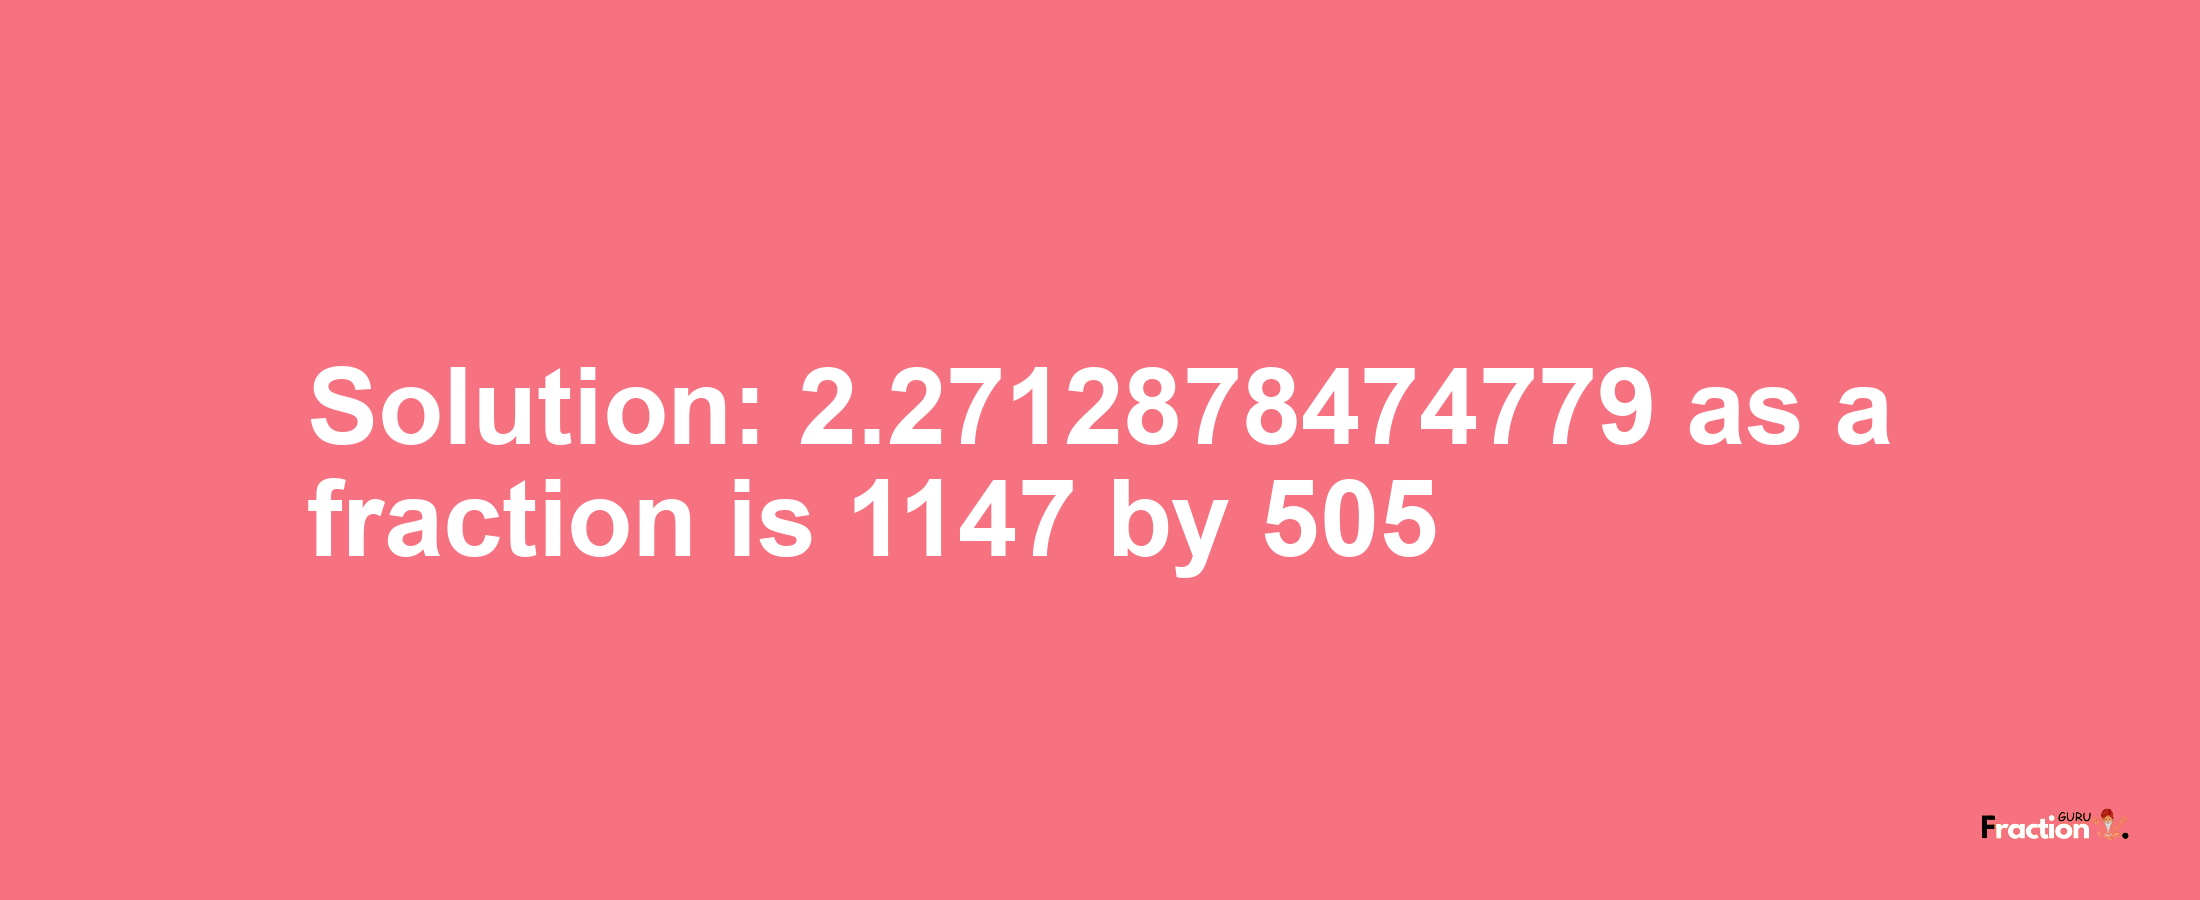 Solution:2.2712878474779 as a fraction is 1147/505